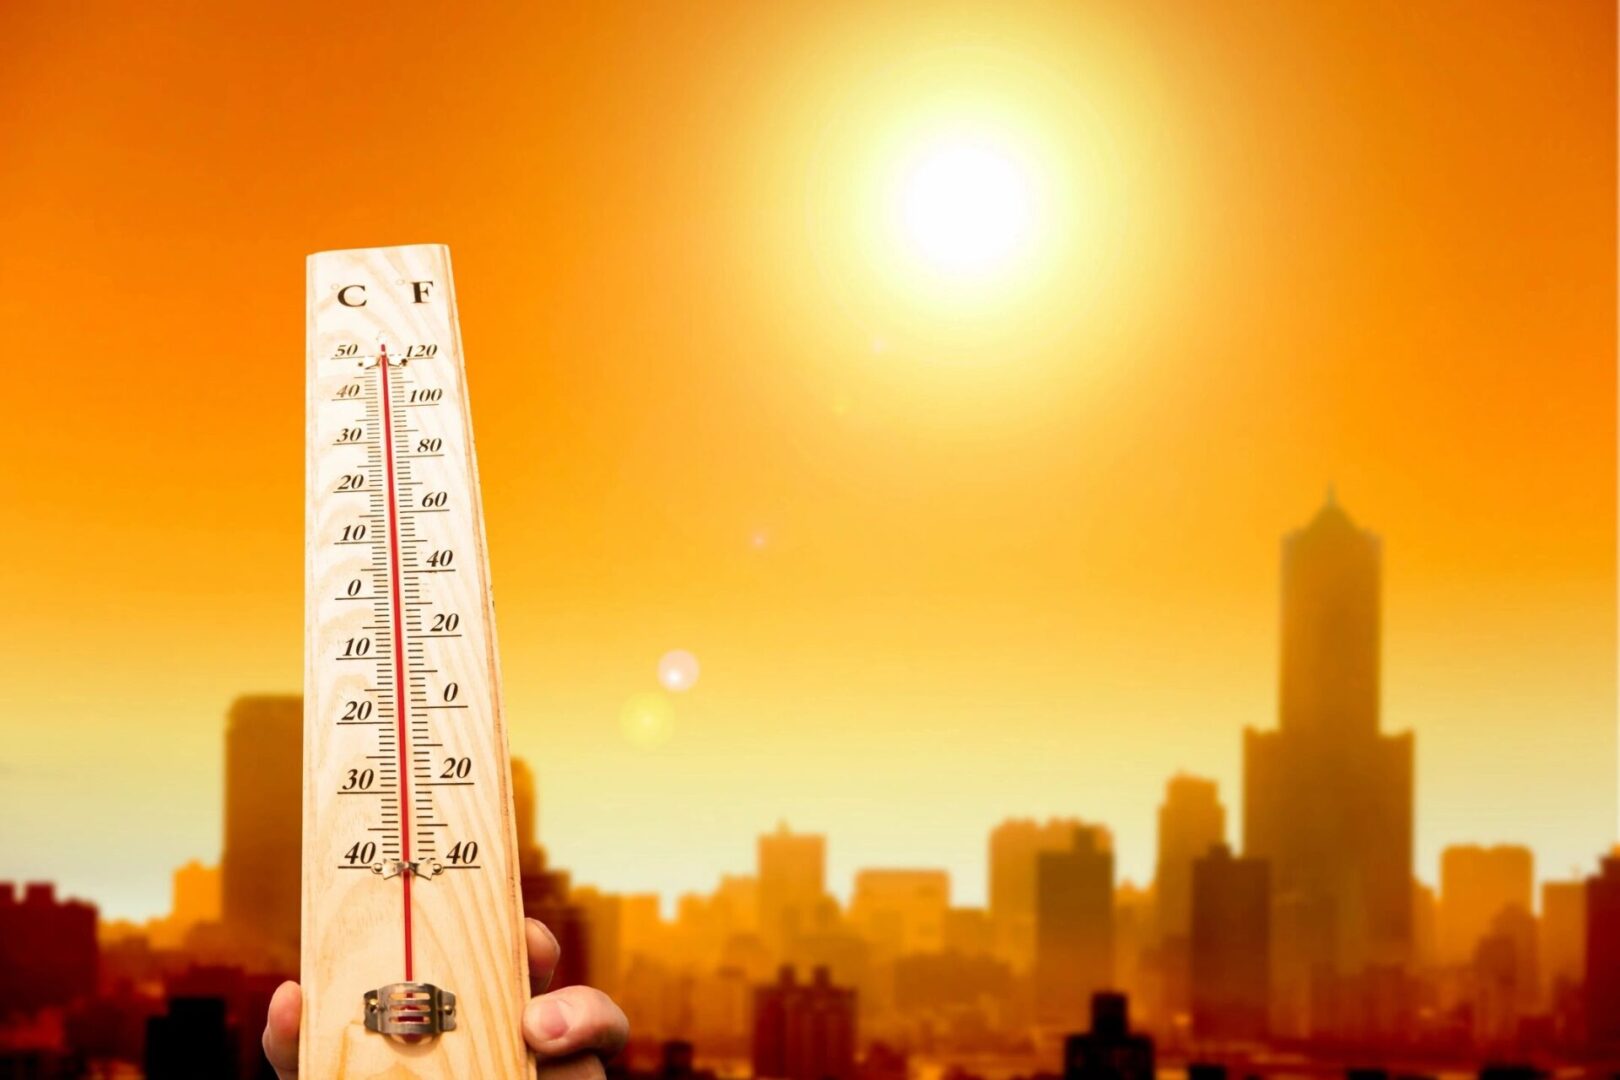 A thermometer in front of the sun with a city skyline behind it.